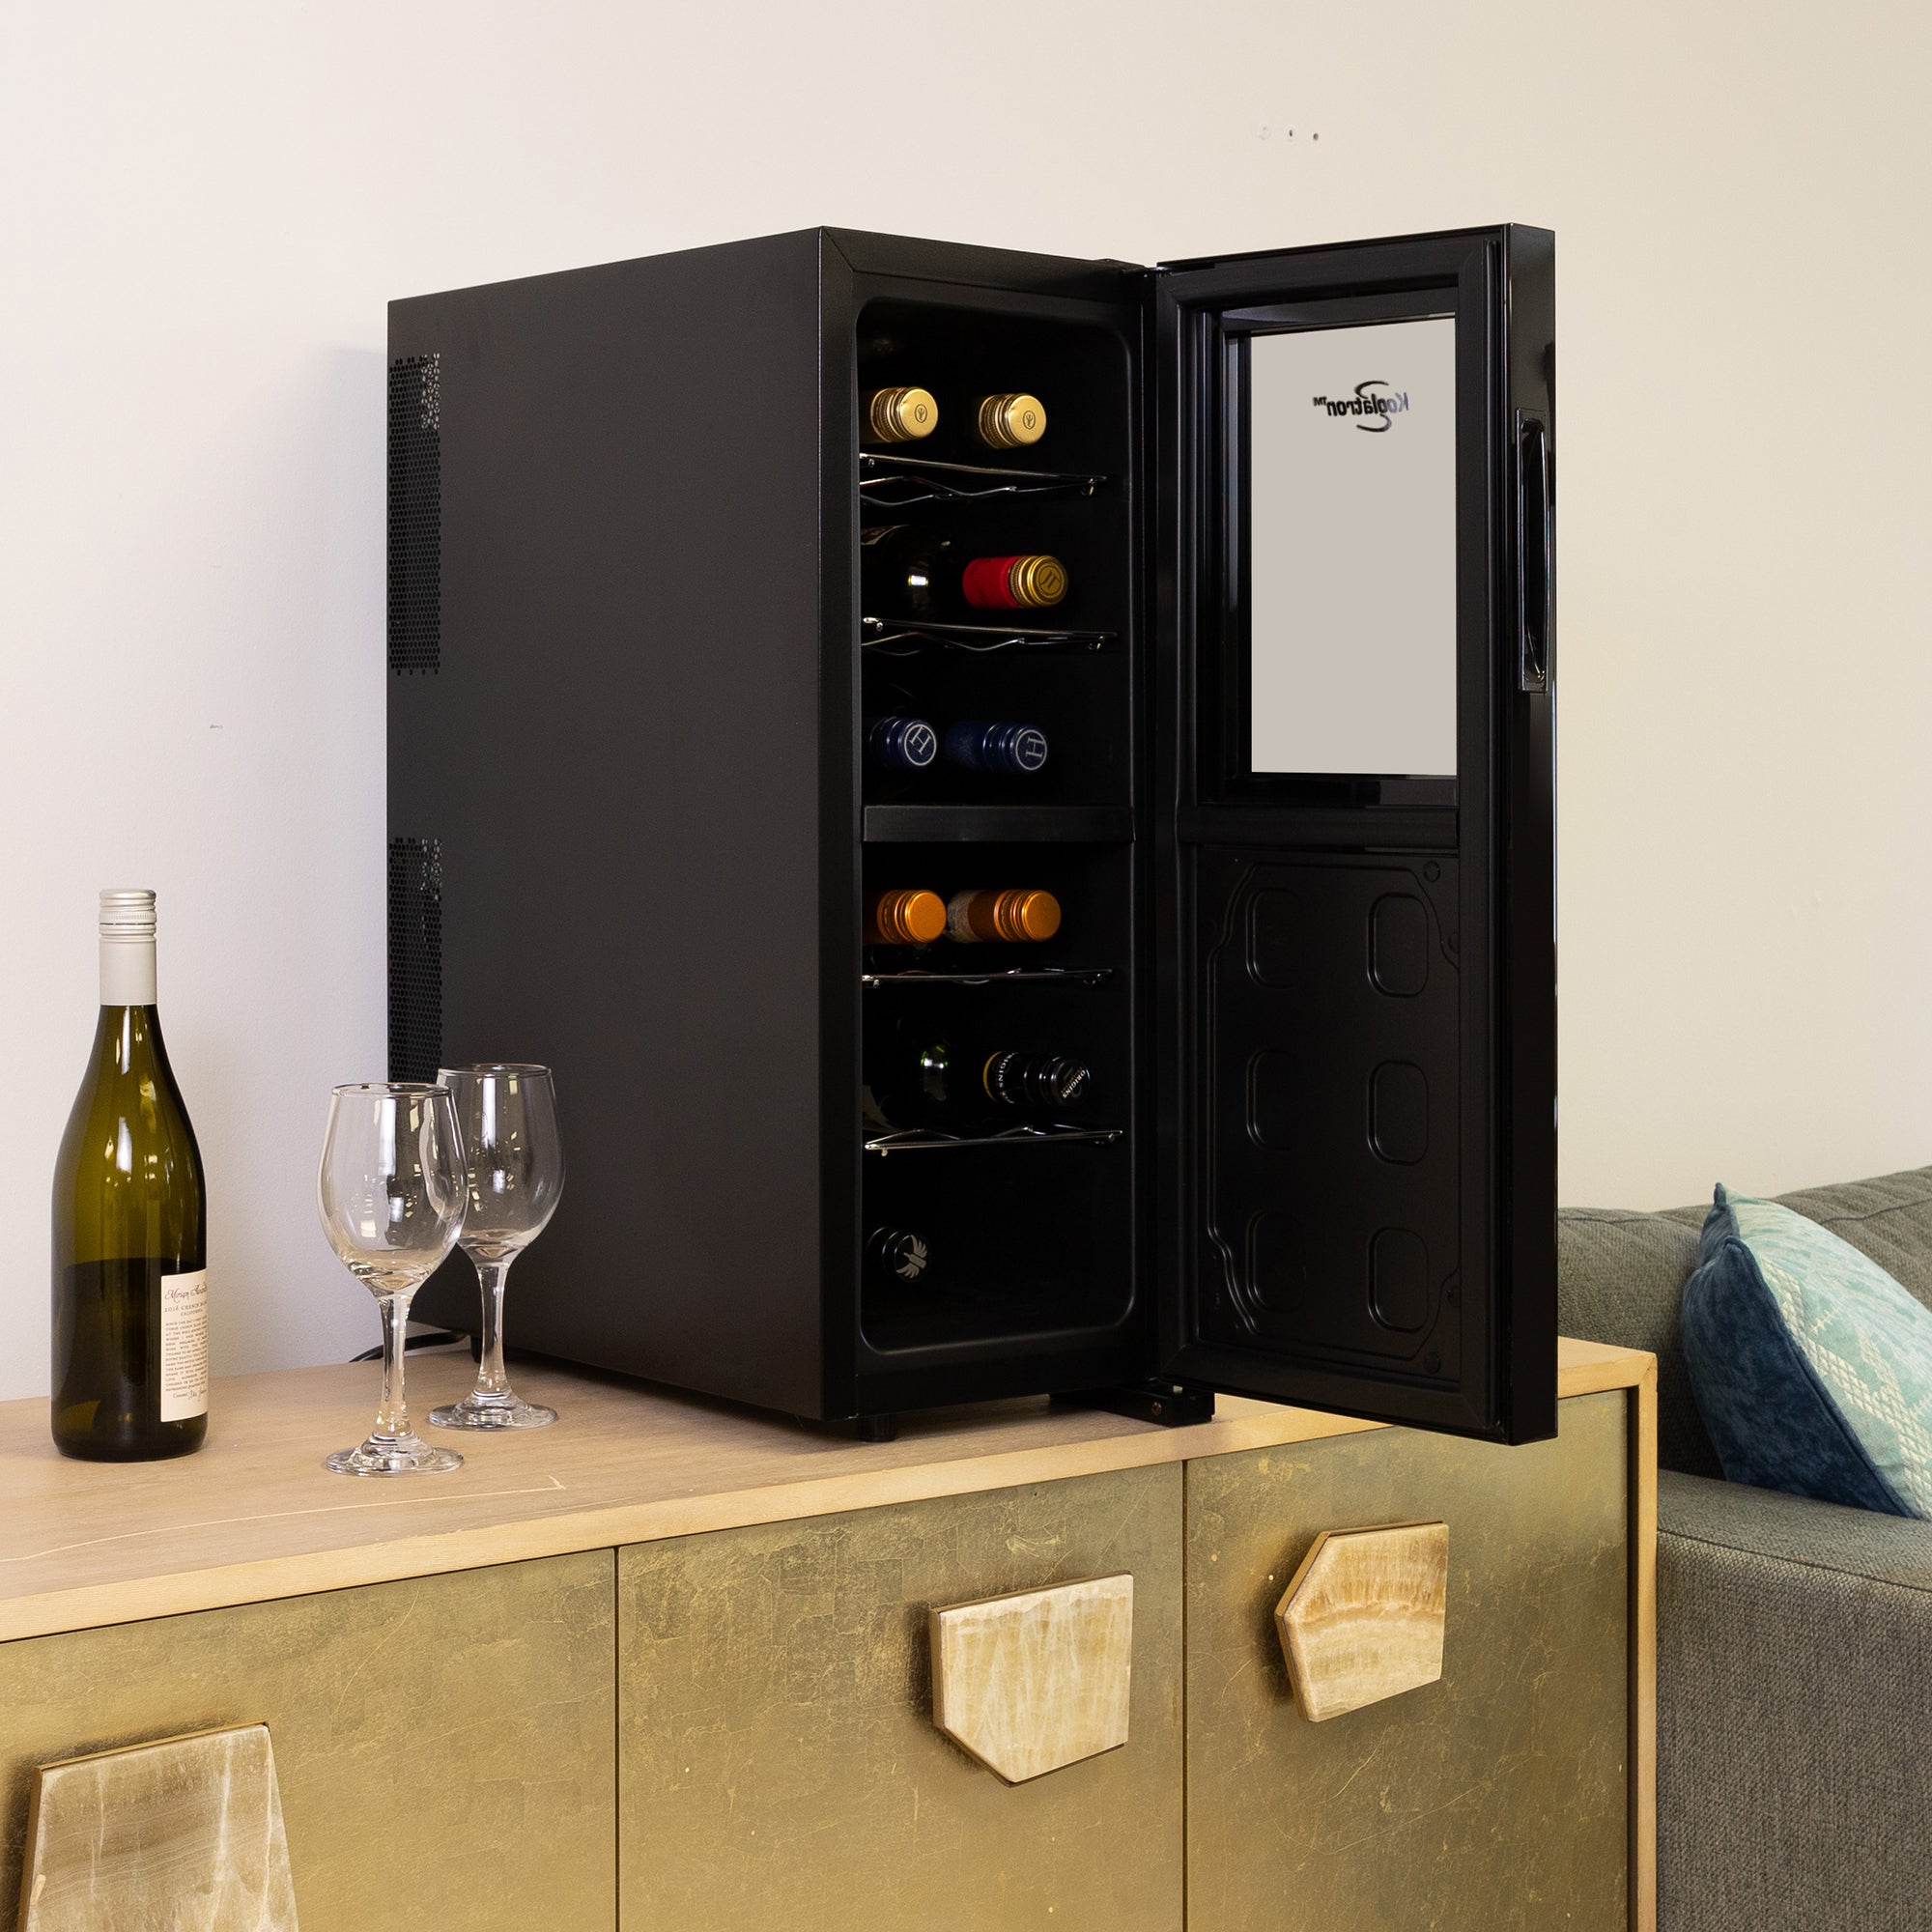 Koolatron 12 bottle wine cooler, open and filled with bottles of wine, on a gold-coloured sideboard with a bottle of wine and one glass beside it